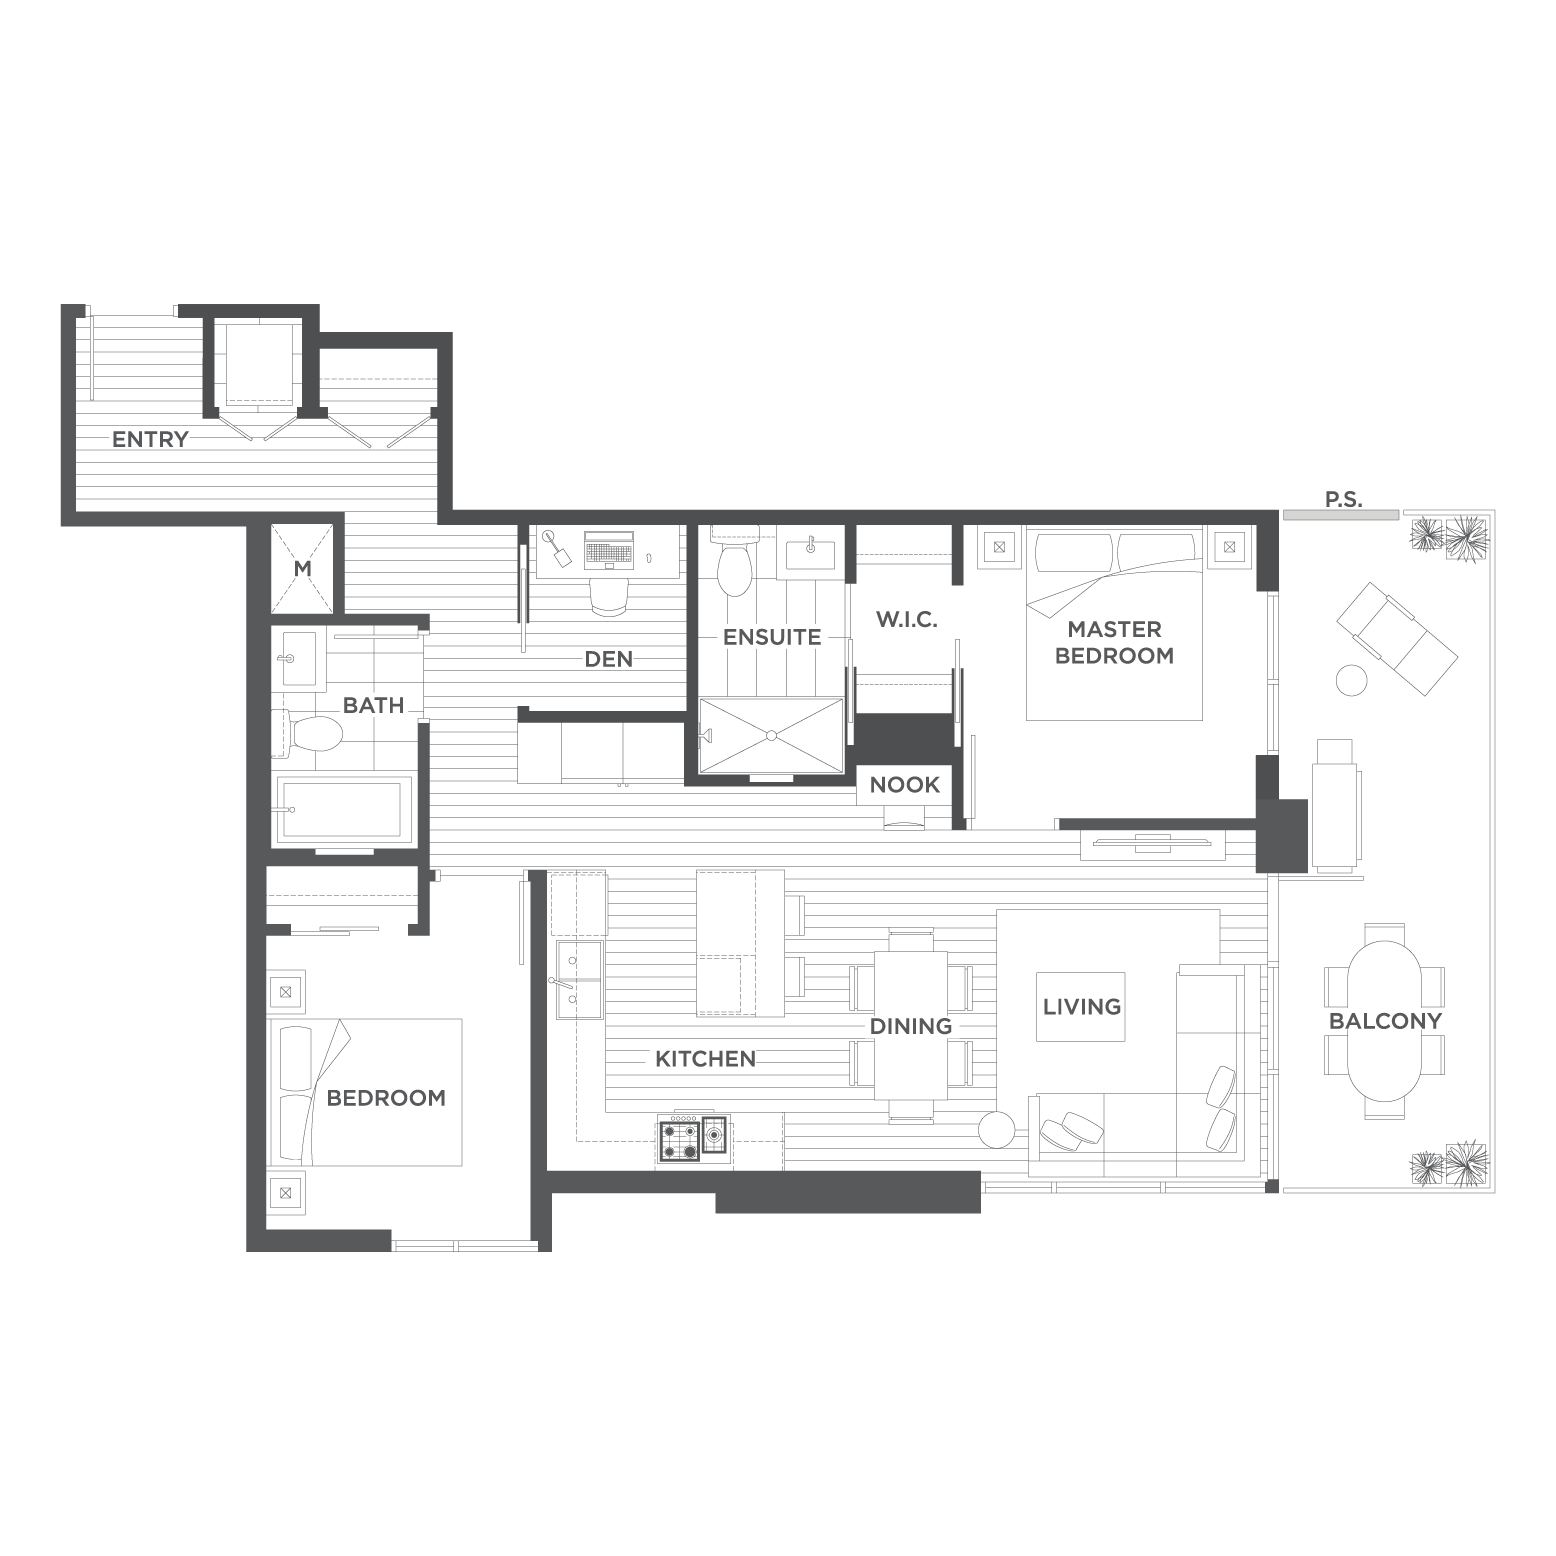 E5 Floor Plan of Gilmore Place Condos with undefined beds